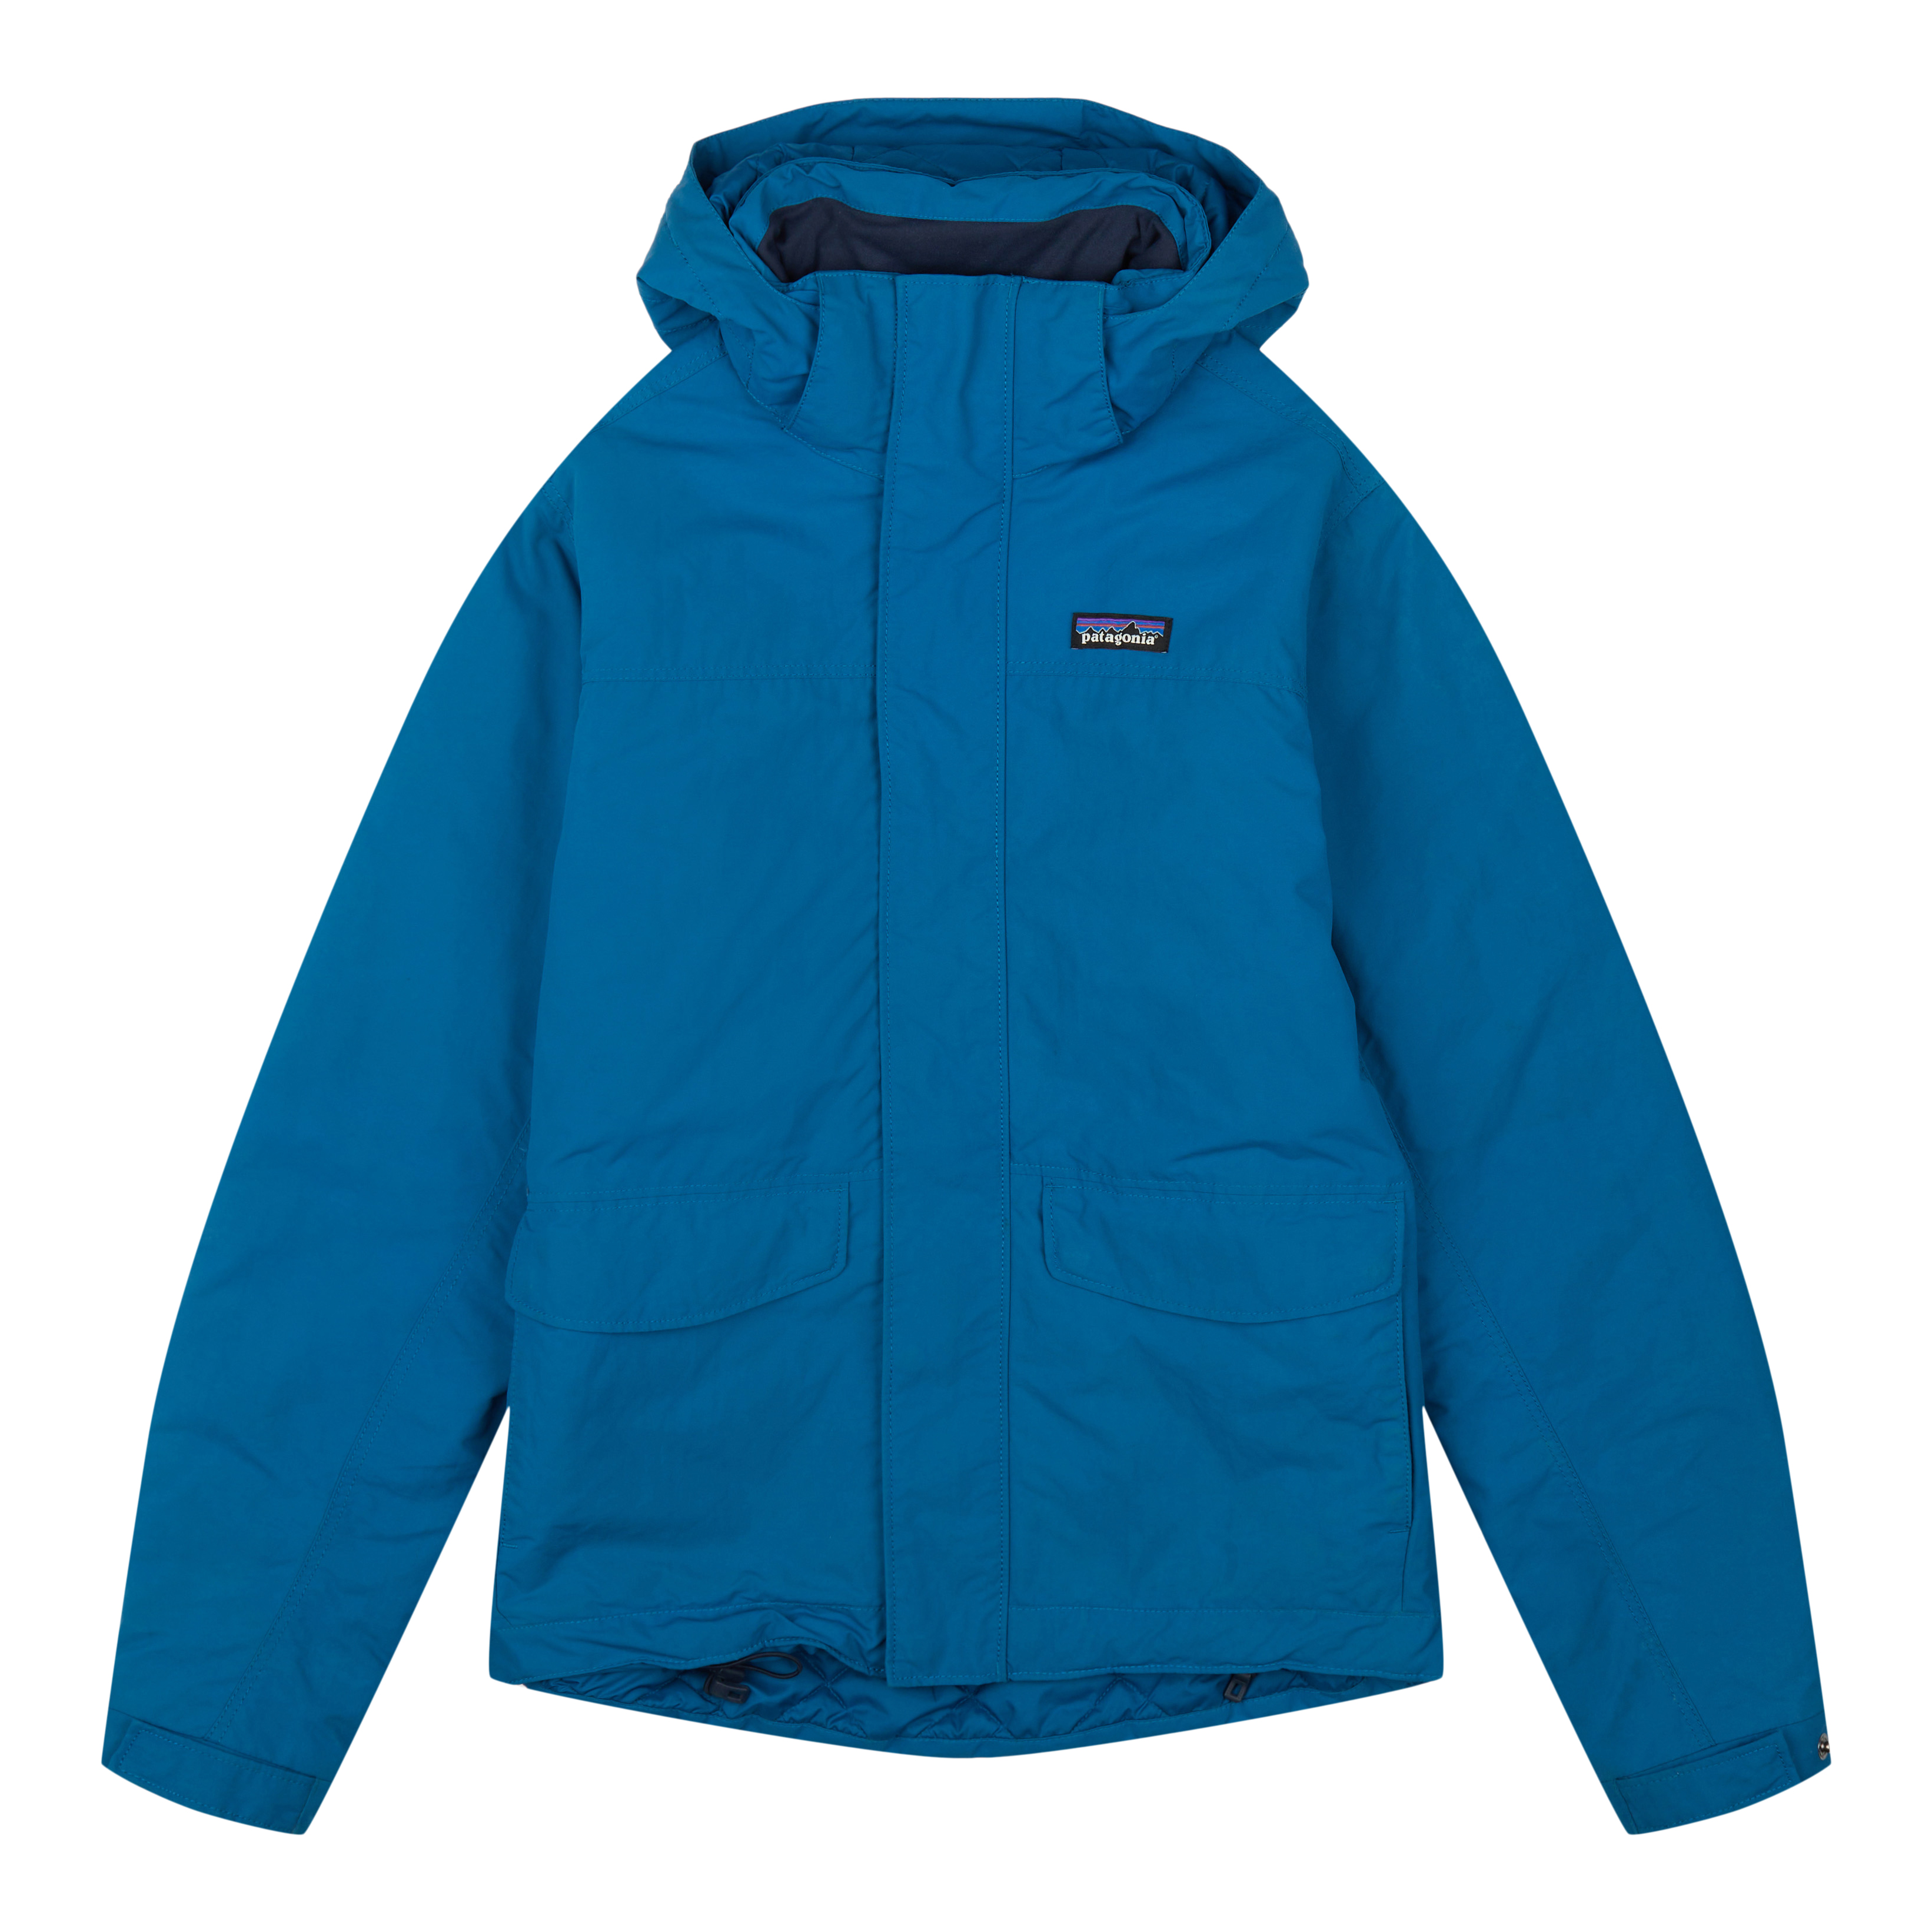 Patagonia Isthmus Anorak - Casual jacket Men's, Free EU Delivery